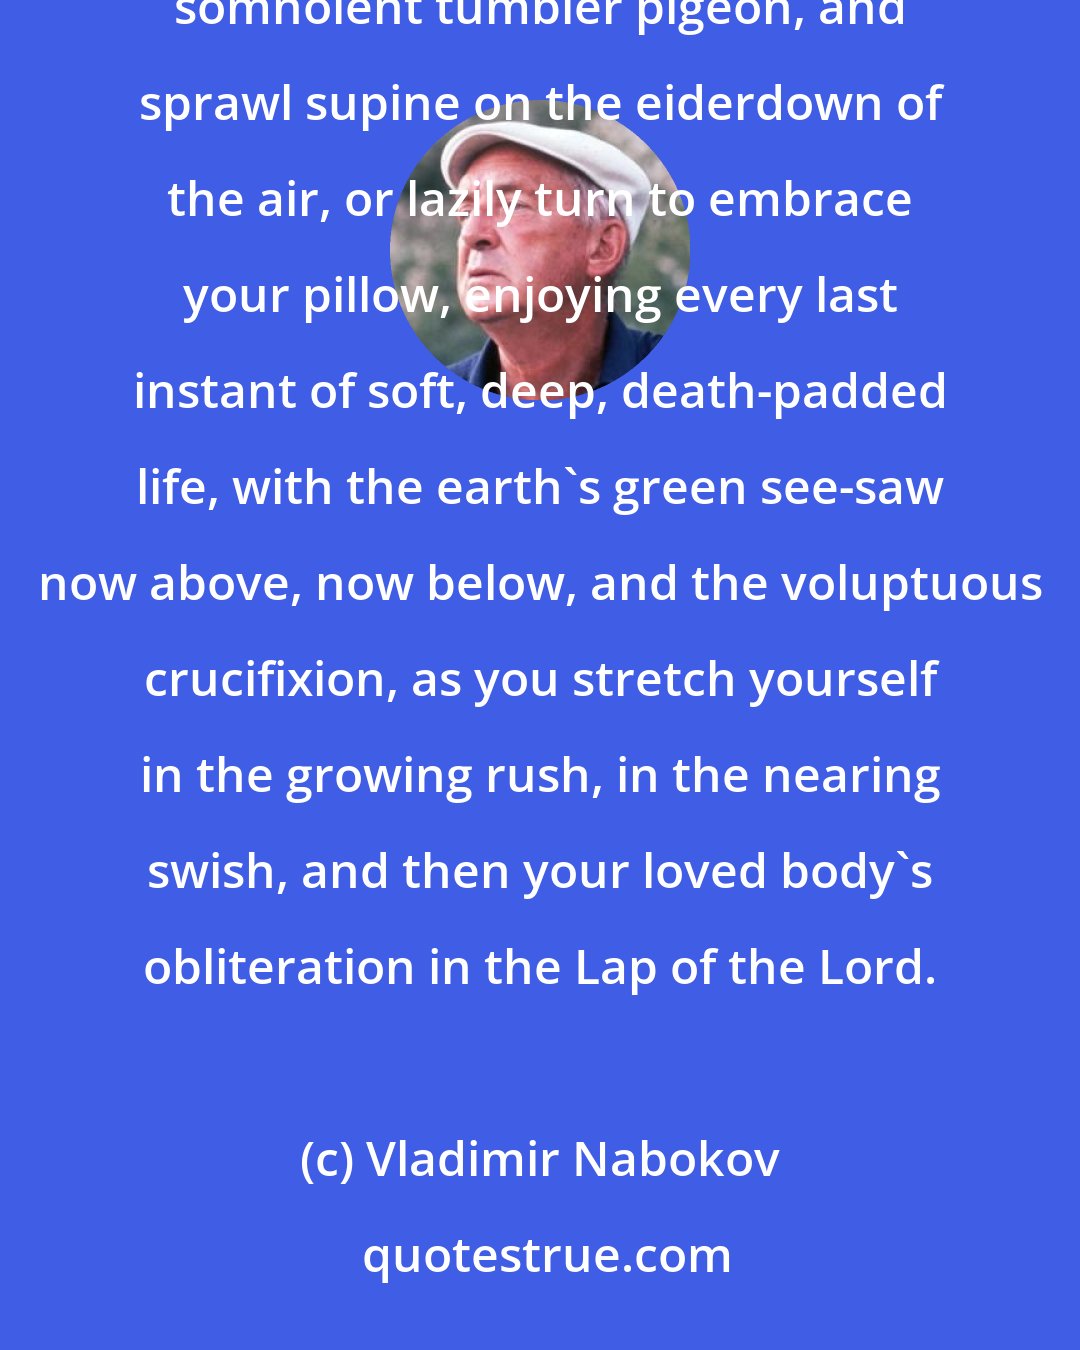 Vladimir Nabokov: Down you go, but all the while you feel suspended and buoyed as you somersault in slow motion like a somnolent tumbler pigeon, and sprawl supine on the eiderdown of the air, or lazily turn to embrace your pillow, enjoying every last instant of soft, deep, death-padded life, with the earth's green see-saw now above, now below, and the voluptuous crucifixion, as you stretch yourself in the growing rush, in the nearing swish, and then your loved body's obliteration in the Lap of the Lord.